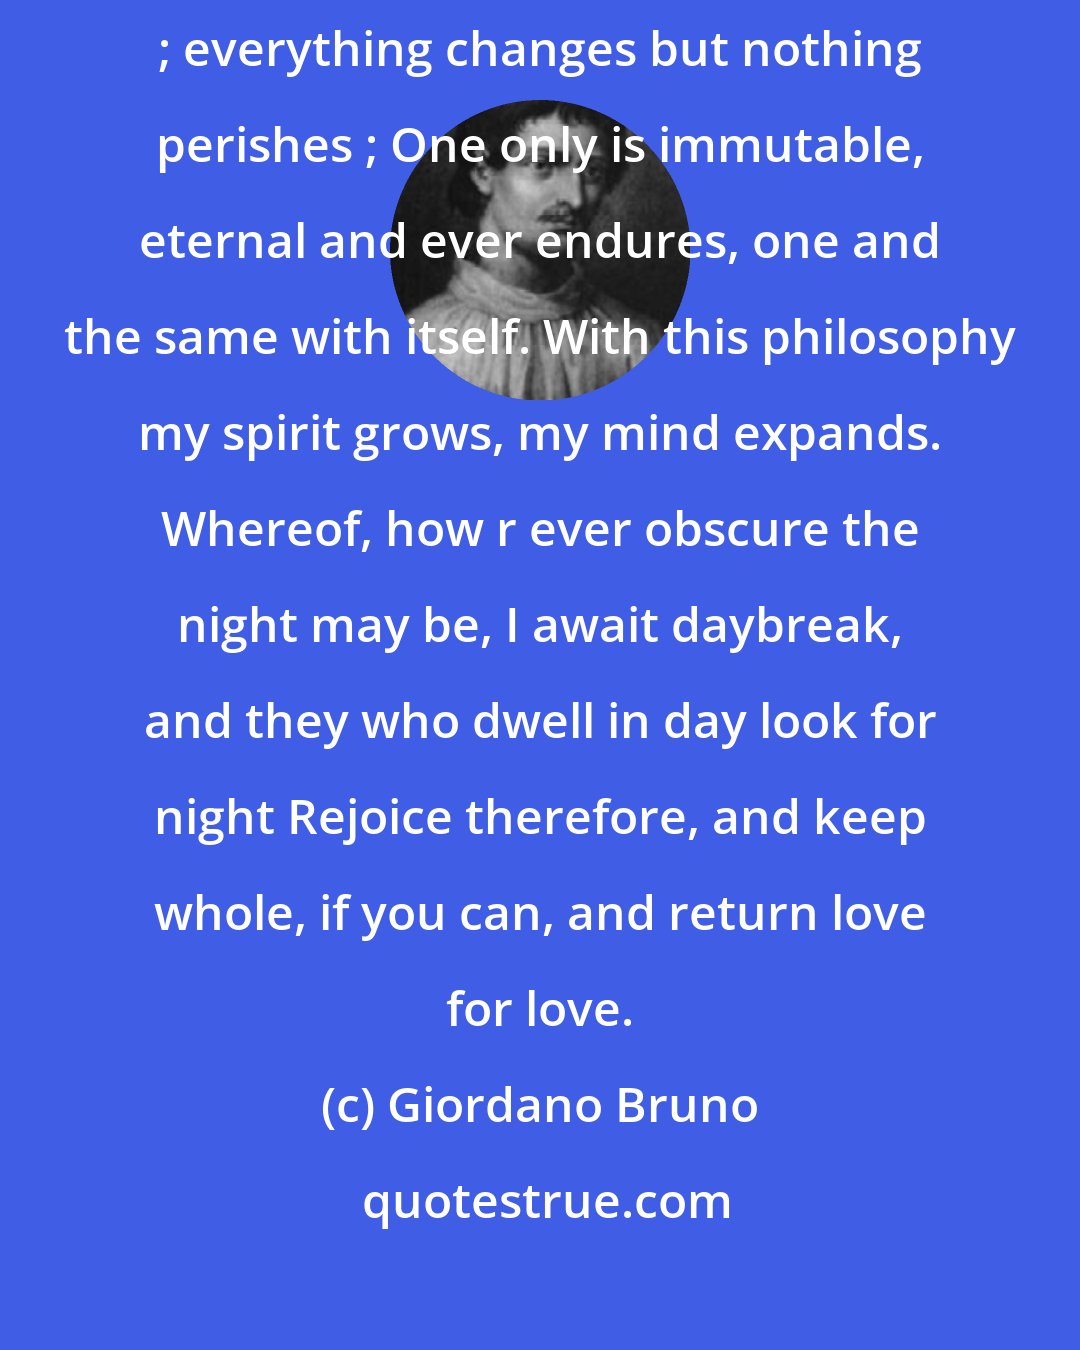 Giordano Bruno: I need not instruct you of my belief: Time gives all and takes all away ; everything changes but nothing perishes ; One only is immutable, eternal and ever endures, one and the same with itself. With this philosophy my spirit grows, my mind expands. Whereof, how r ever obscure the night may be, I await daybreak, and they who dwell in day look for night Rejoice therefore, and keep whole, if you can, and return love for love.